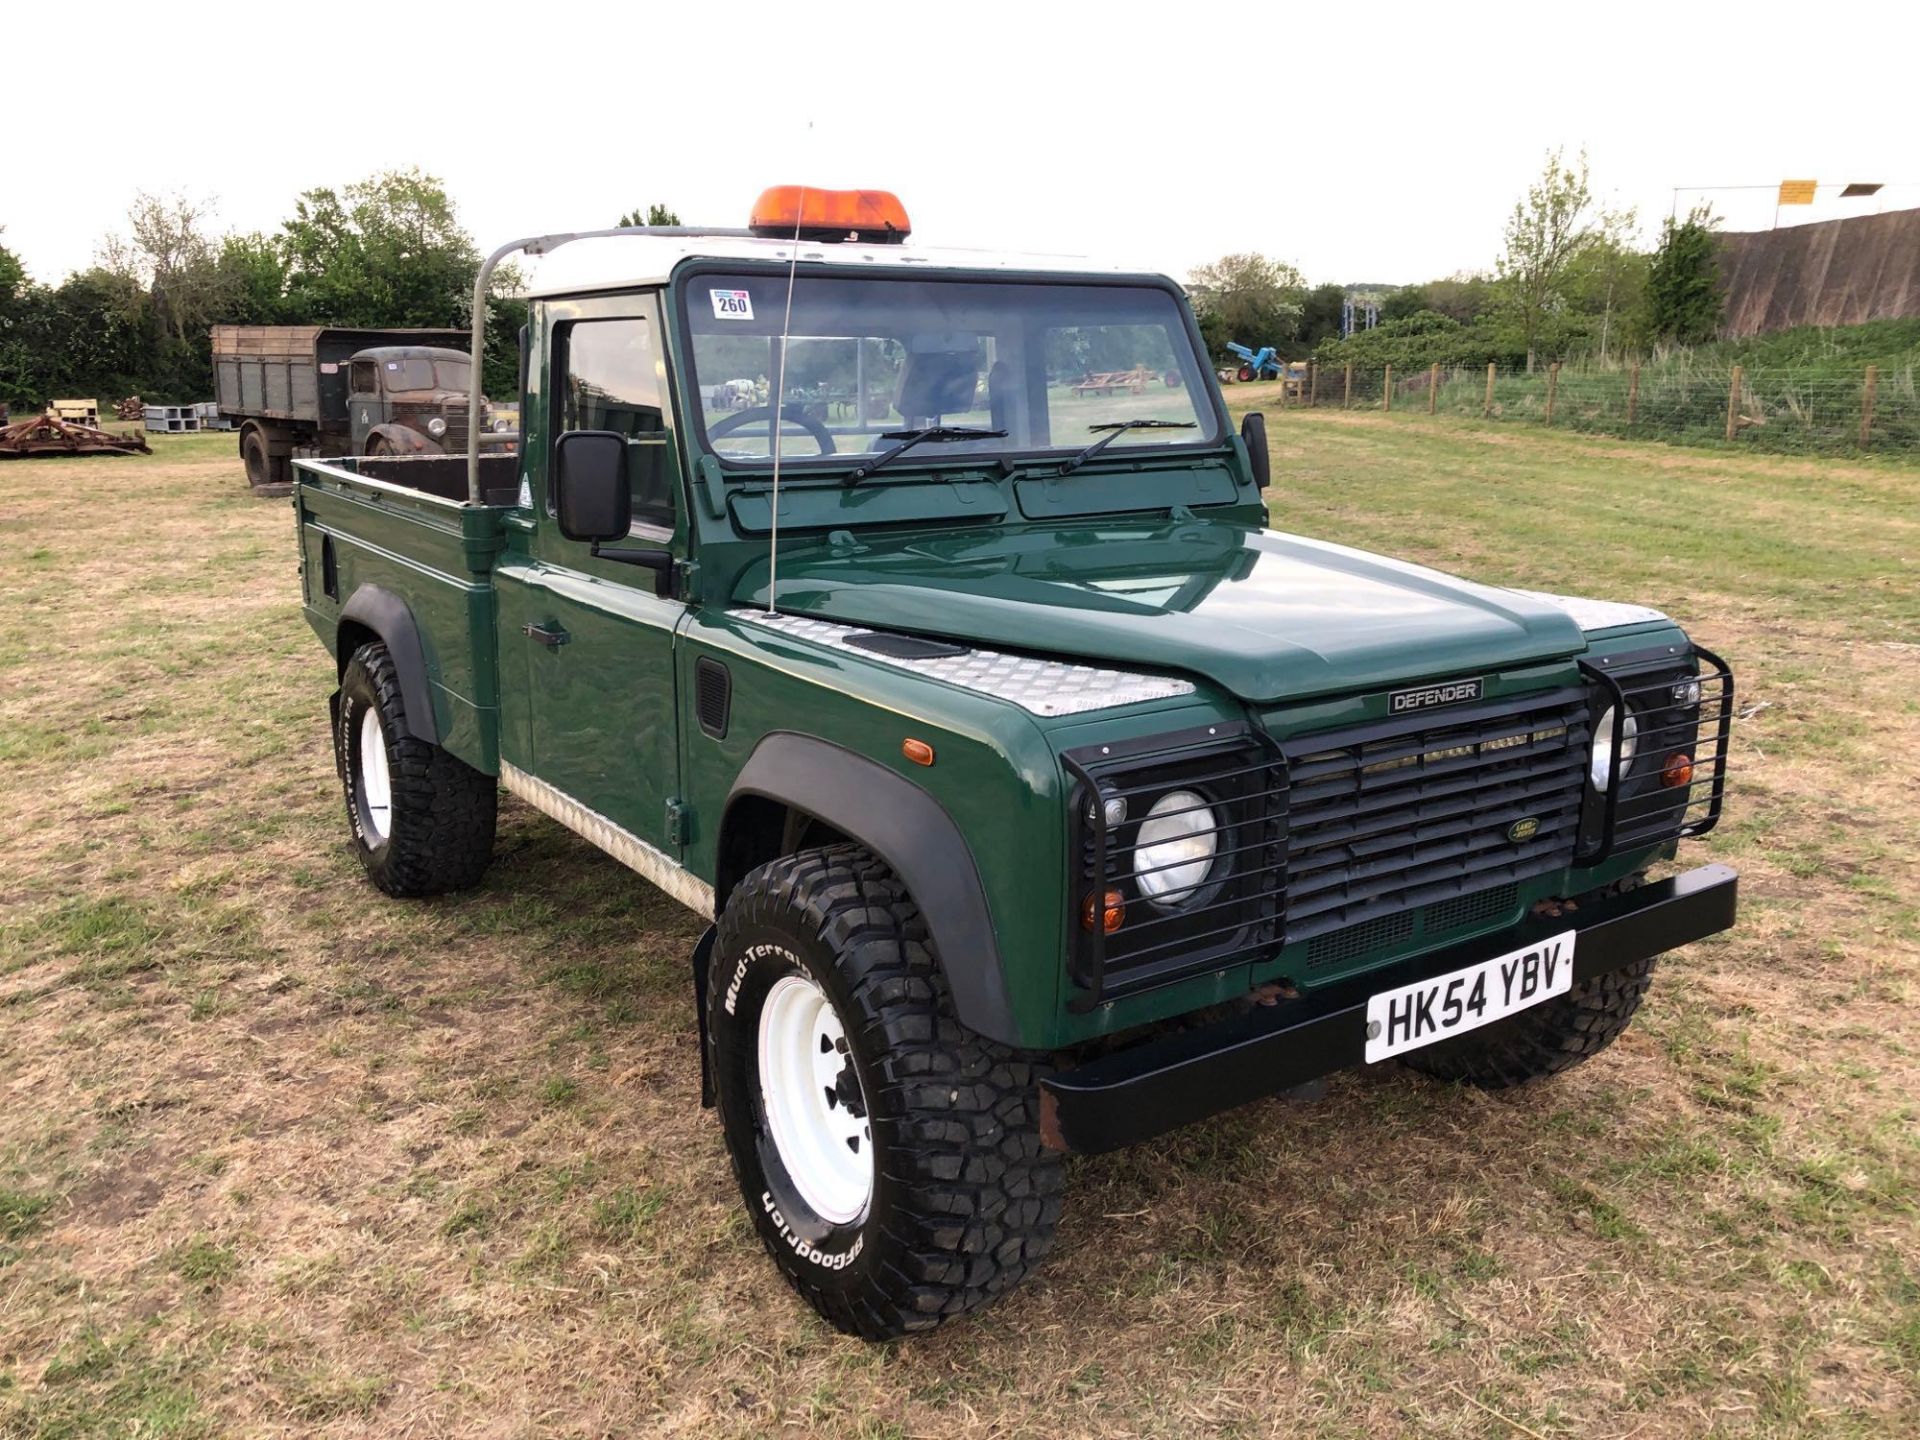 2004 Land Rover Defender 110 High-Capacity Pickup TD5, 4wd, manual, green, 2 door, with leather upho - Image 3 of 13